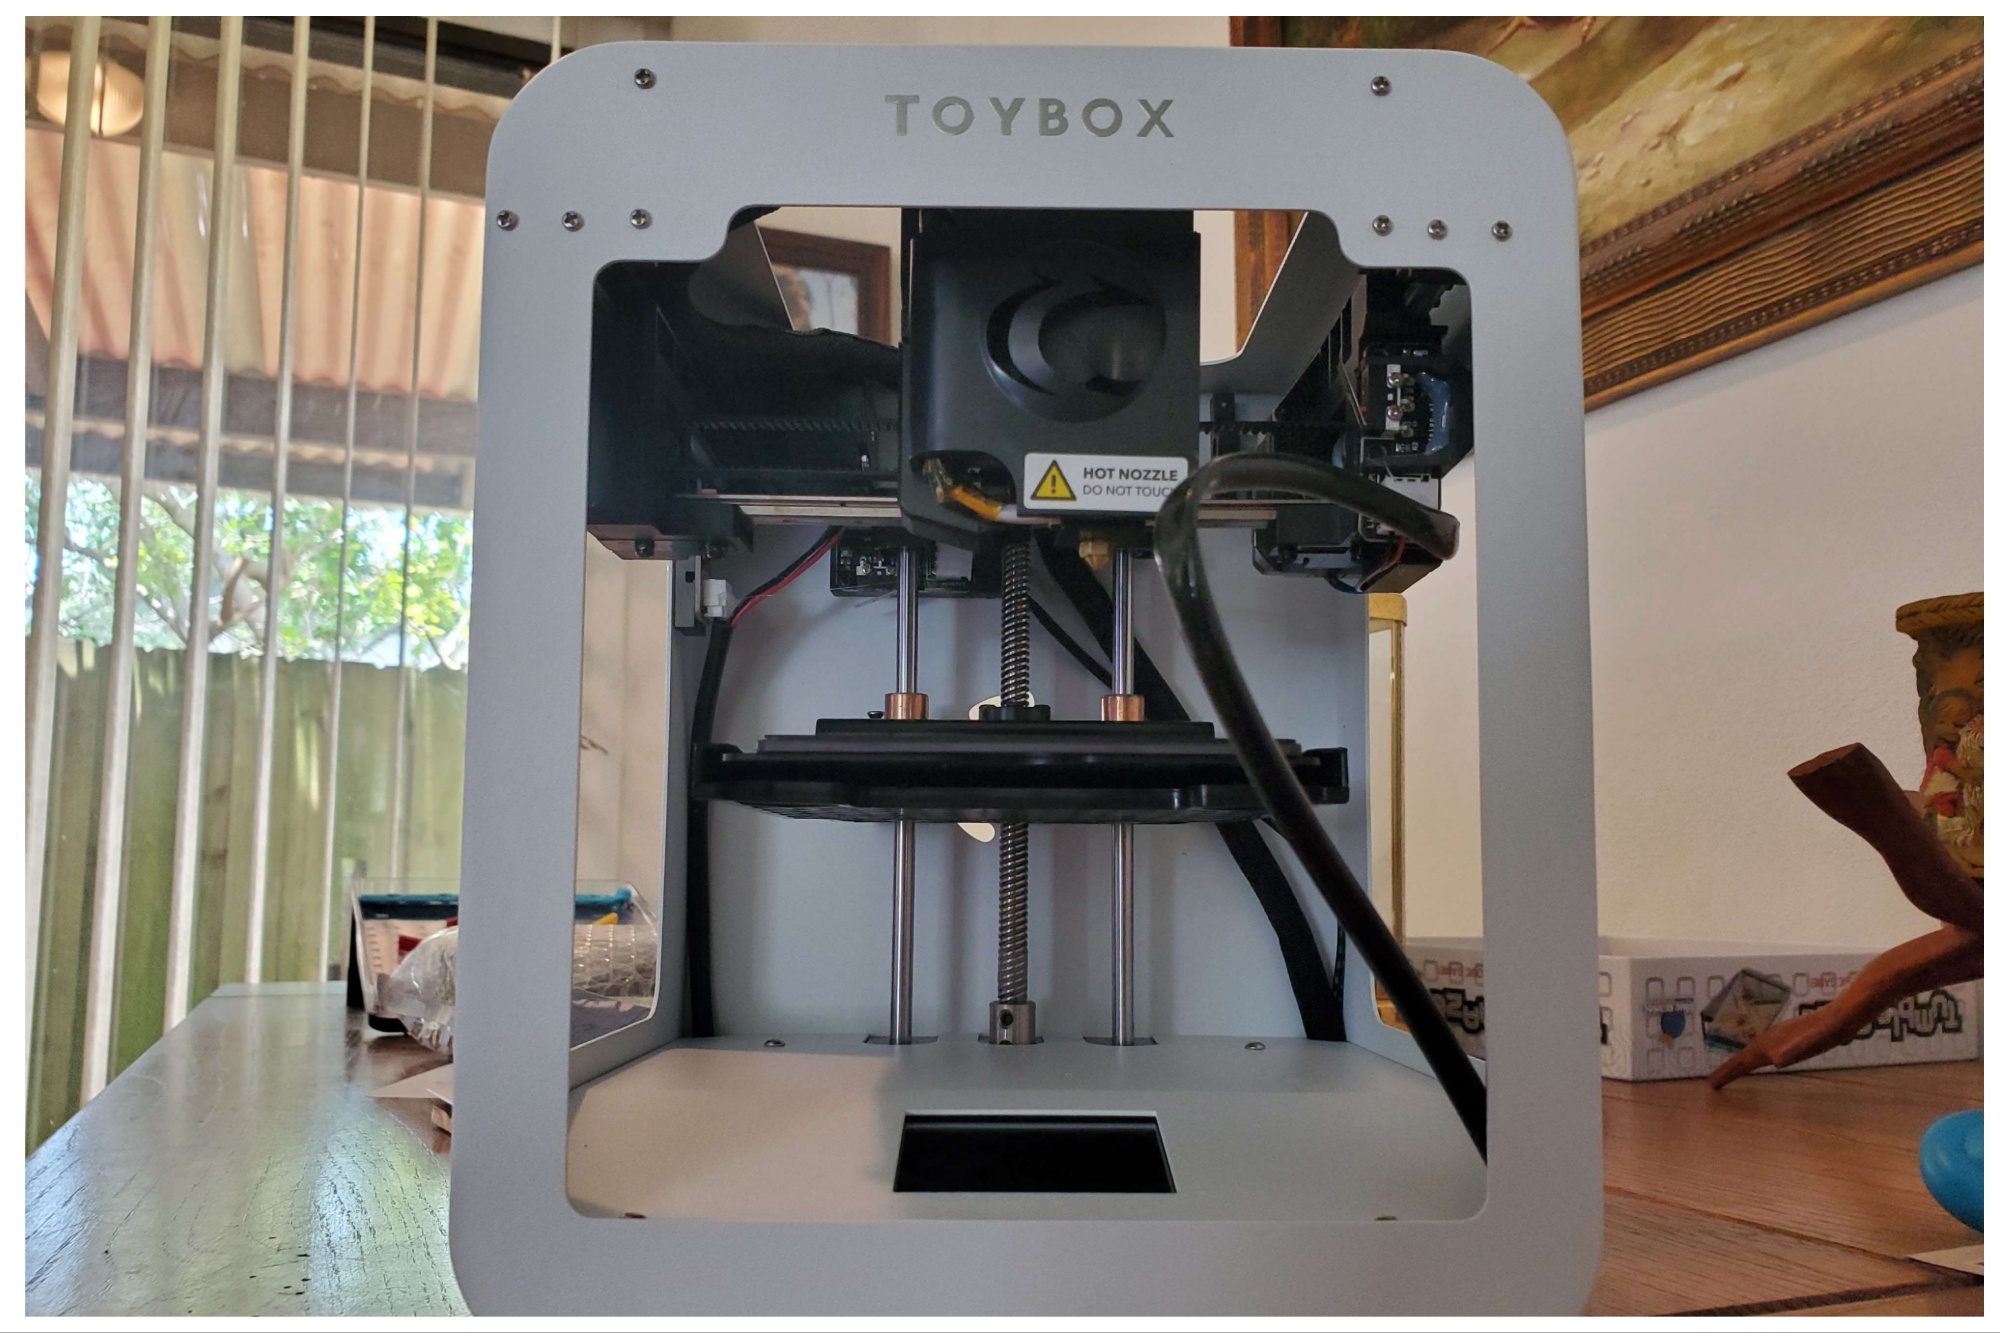 Toybox 3D printer set up on a wooden table.